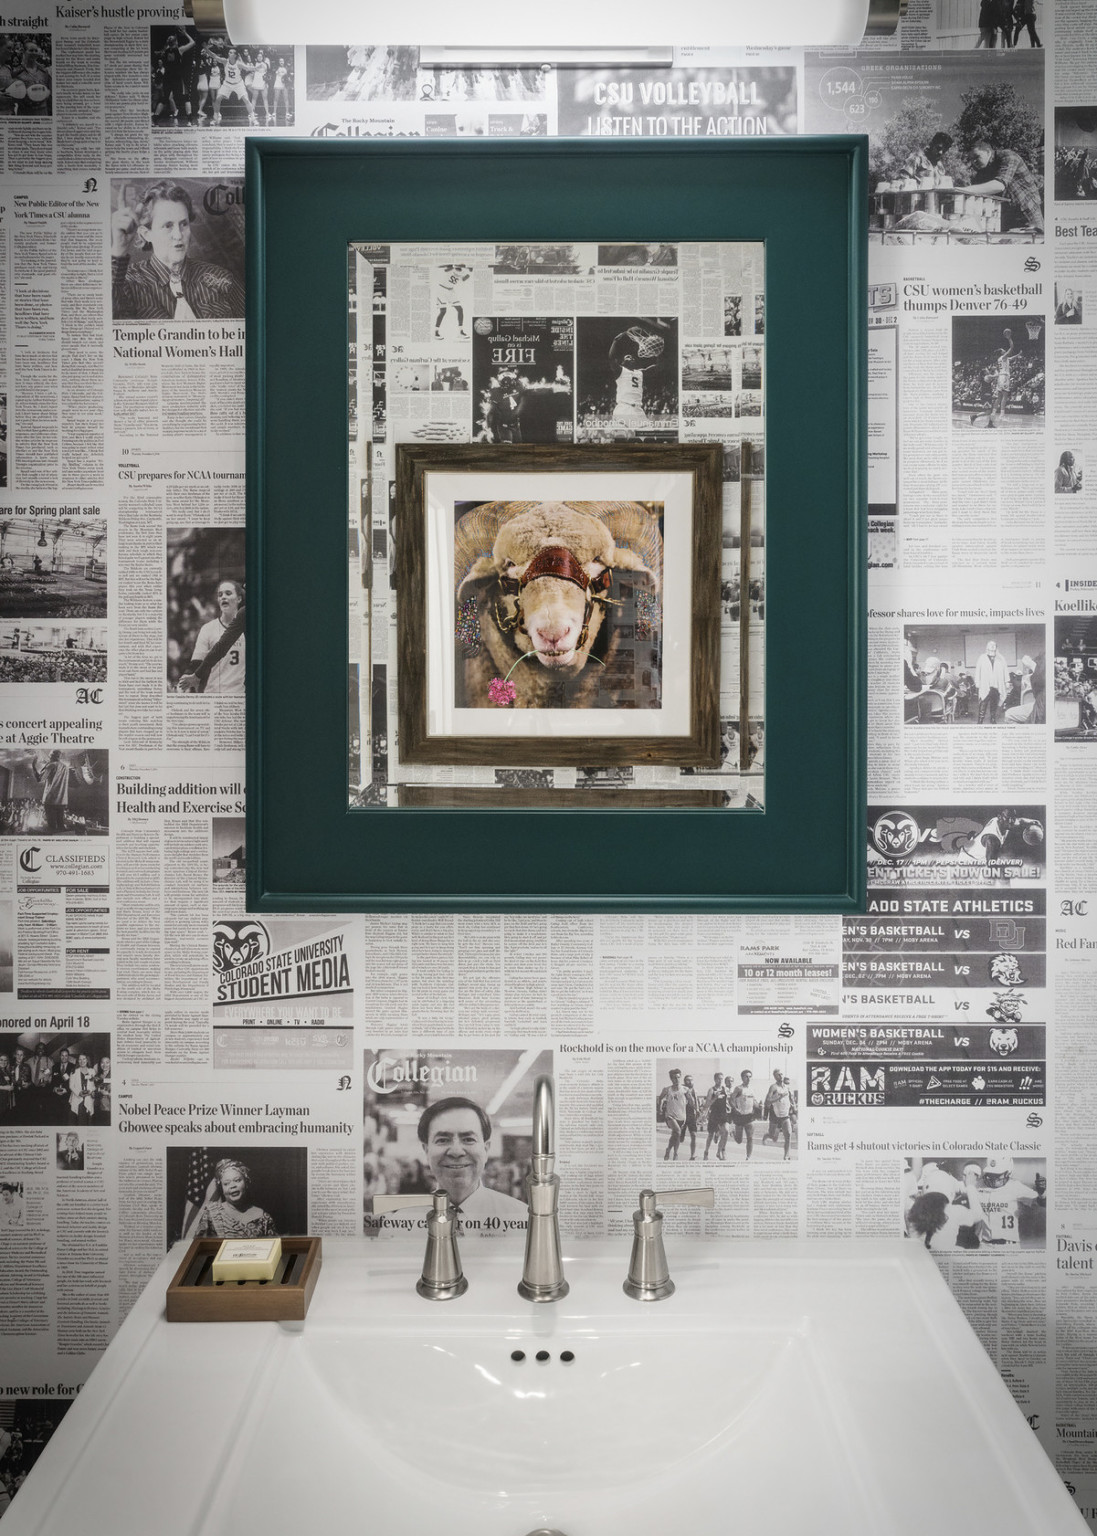 Framed picture within a green frame on wall with black and white newspaper wallpaper over white sink with silver faucets